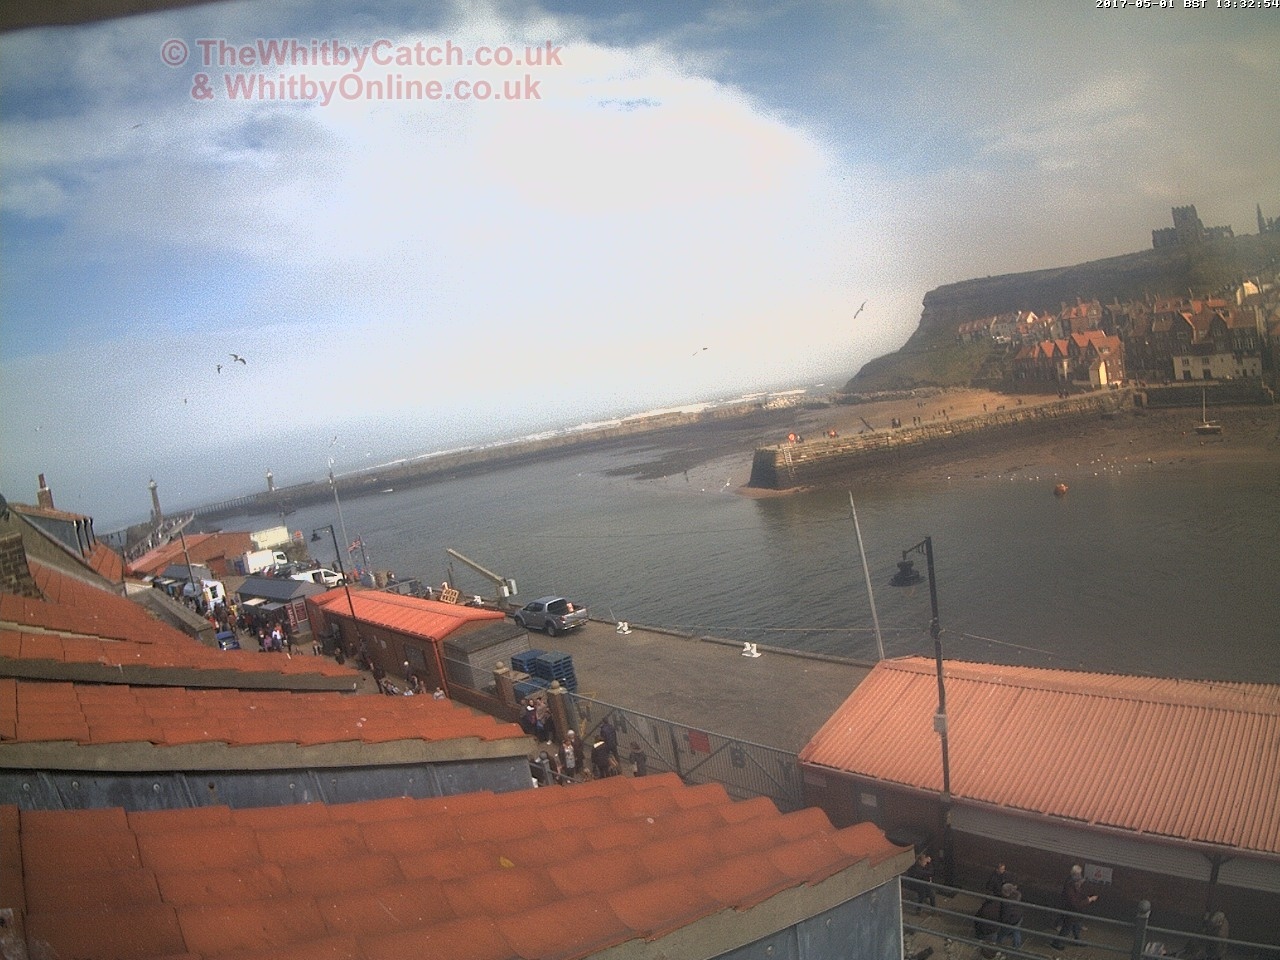 Whitby Mon 1st May 2017 13:33.